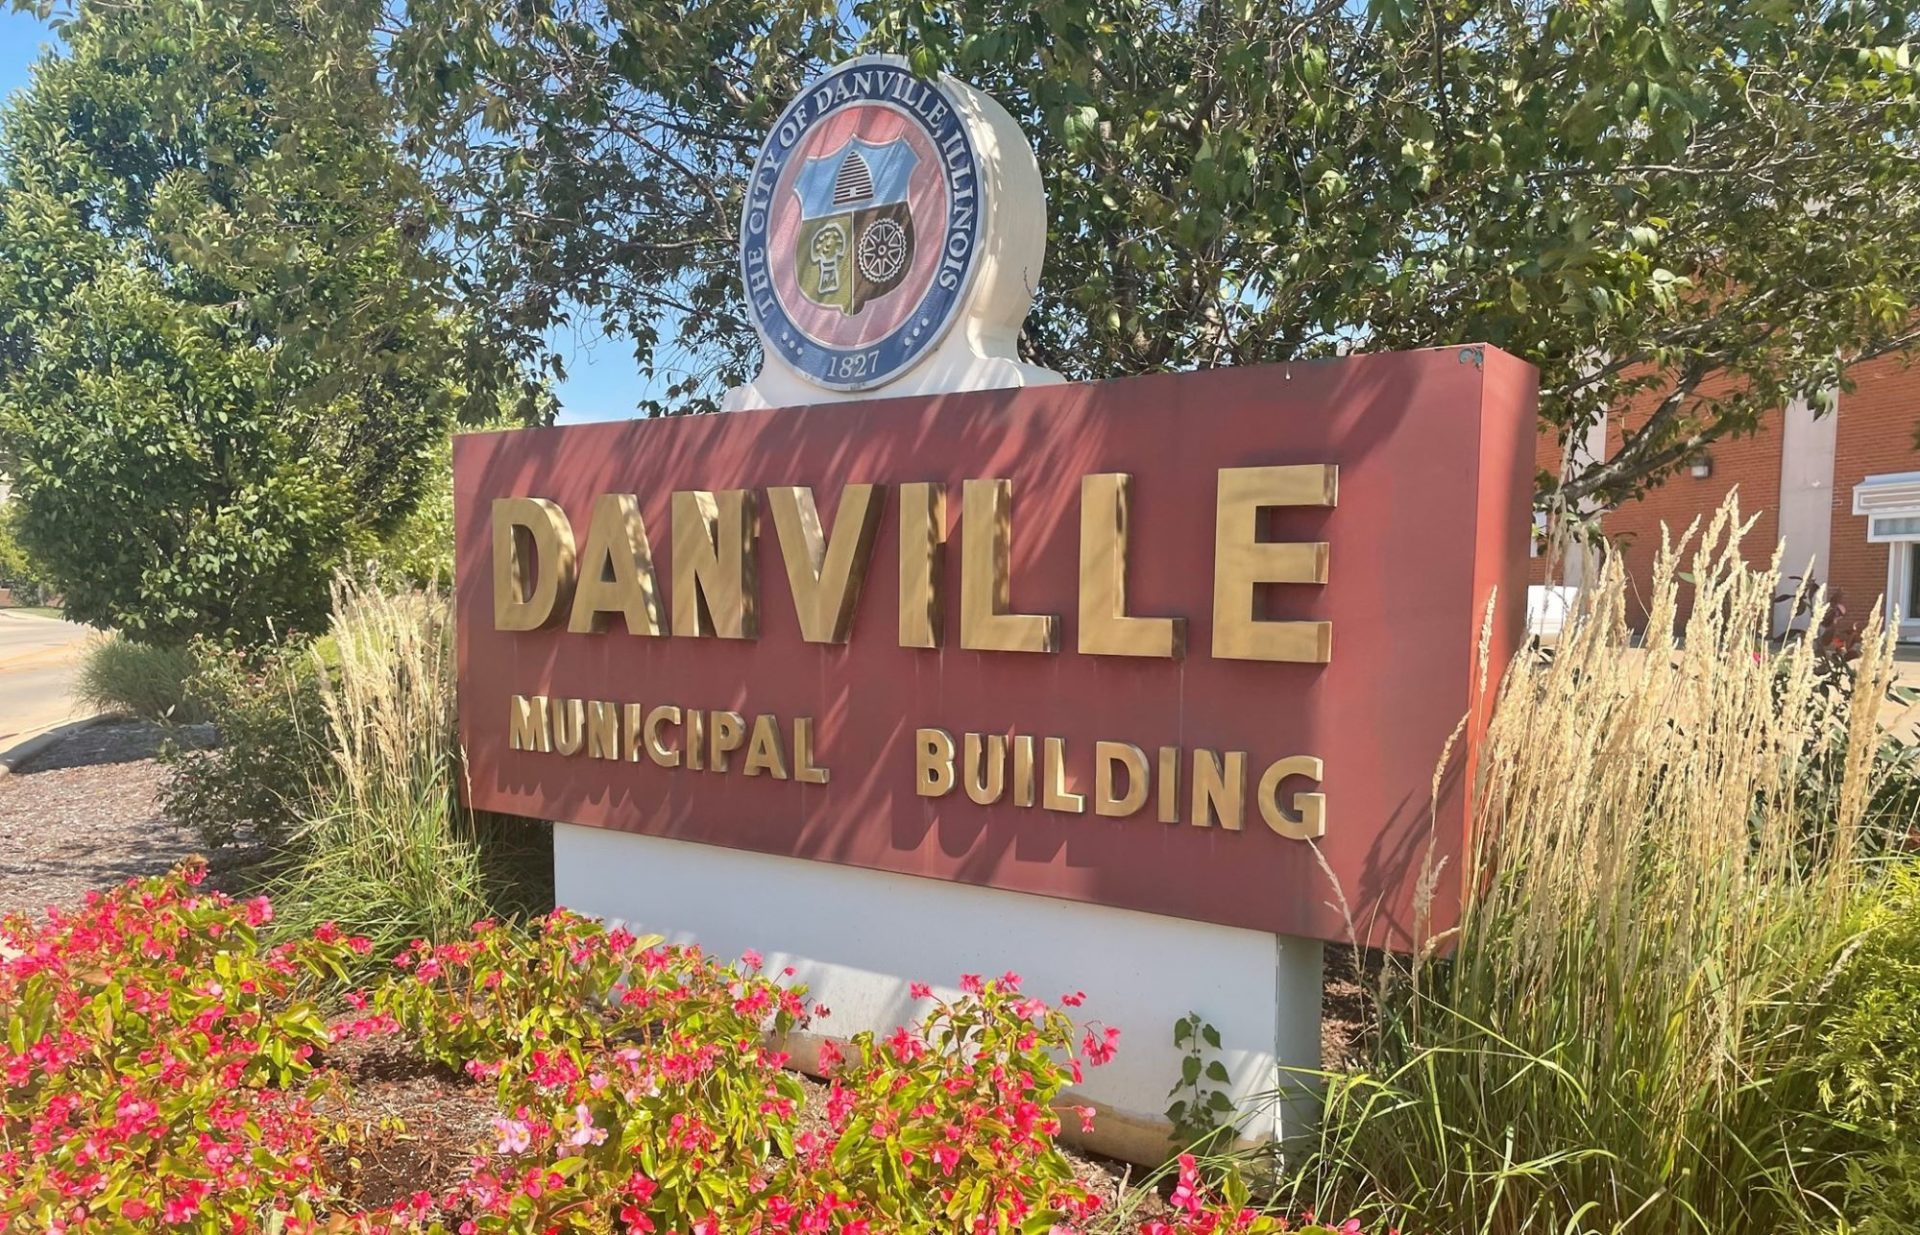 A brick red rectangular sign that says DANVILLE MUNICIPAL BUILDING in gold letters. It is surrounded by flower beds and decorative grasses.